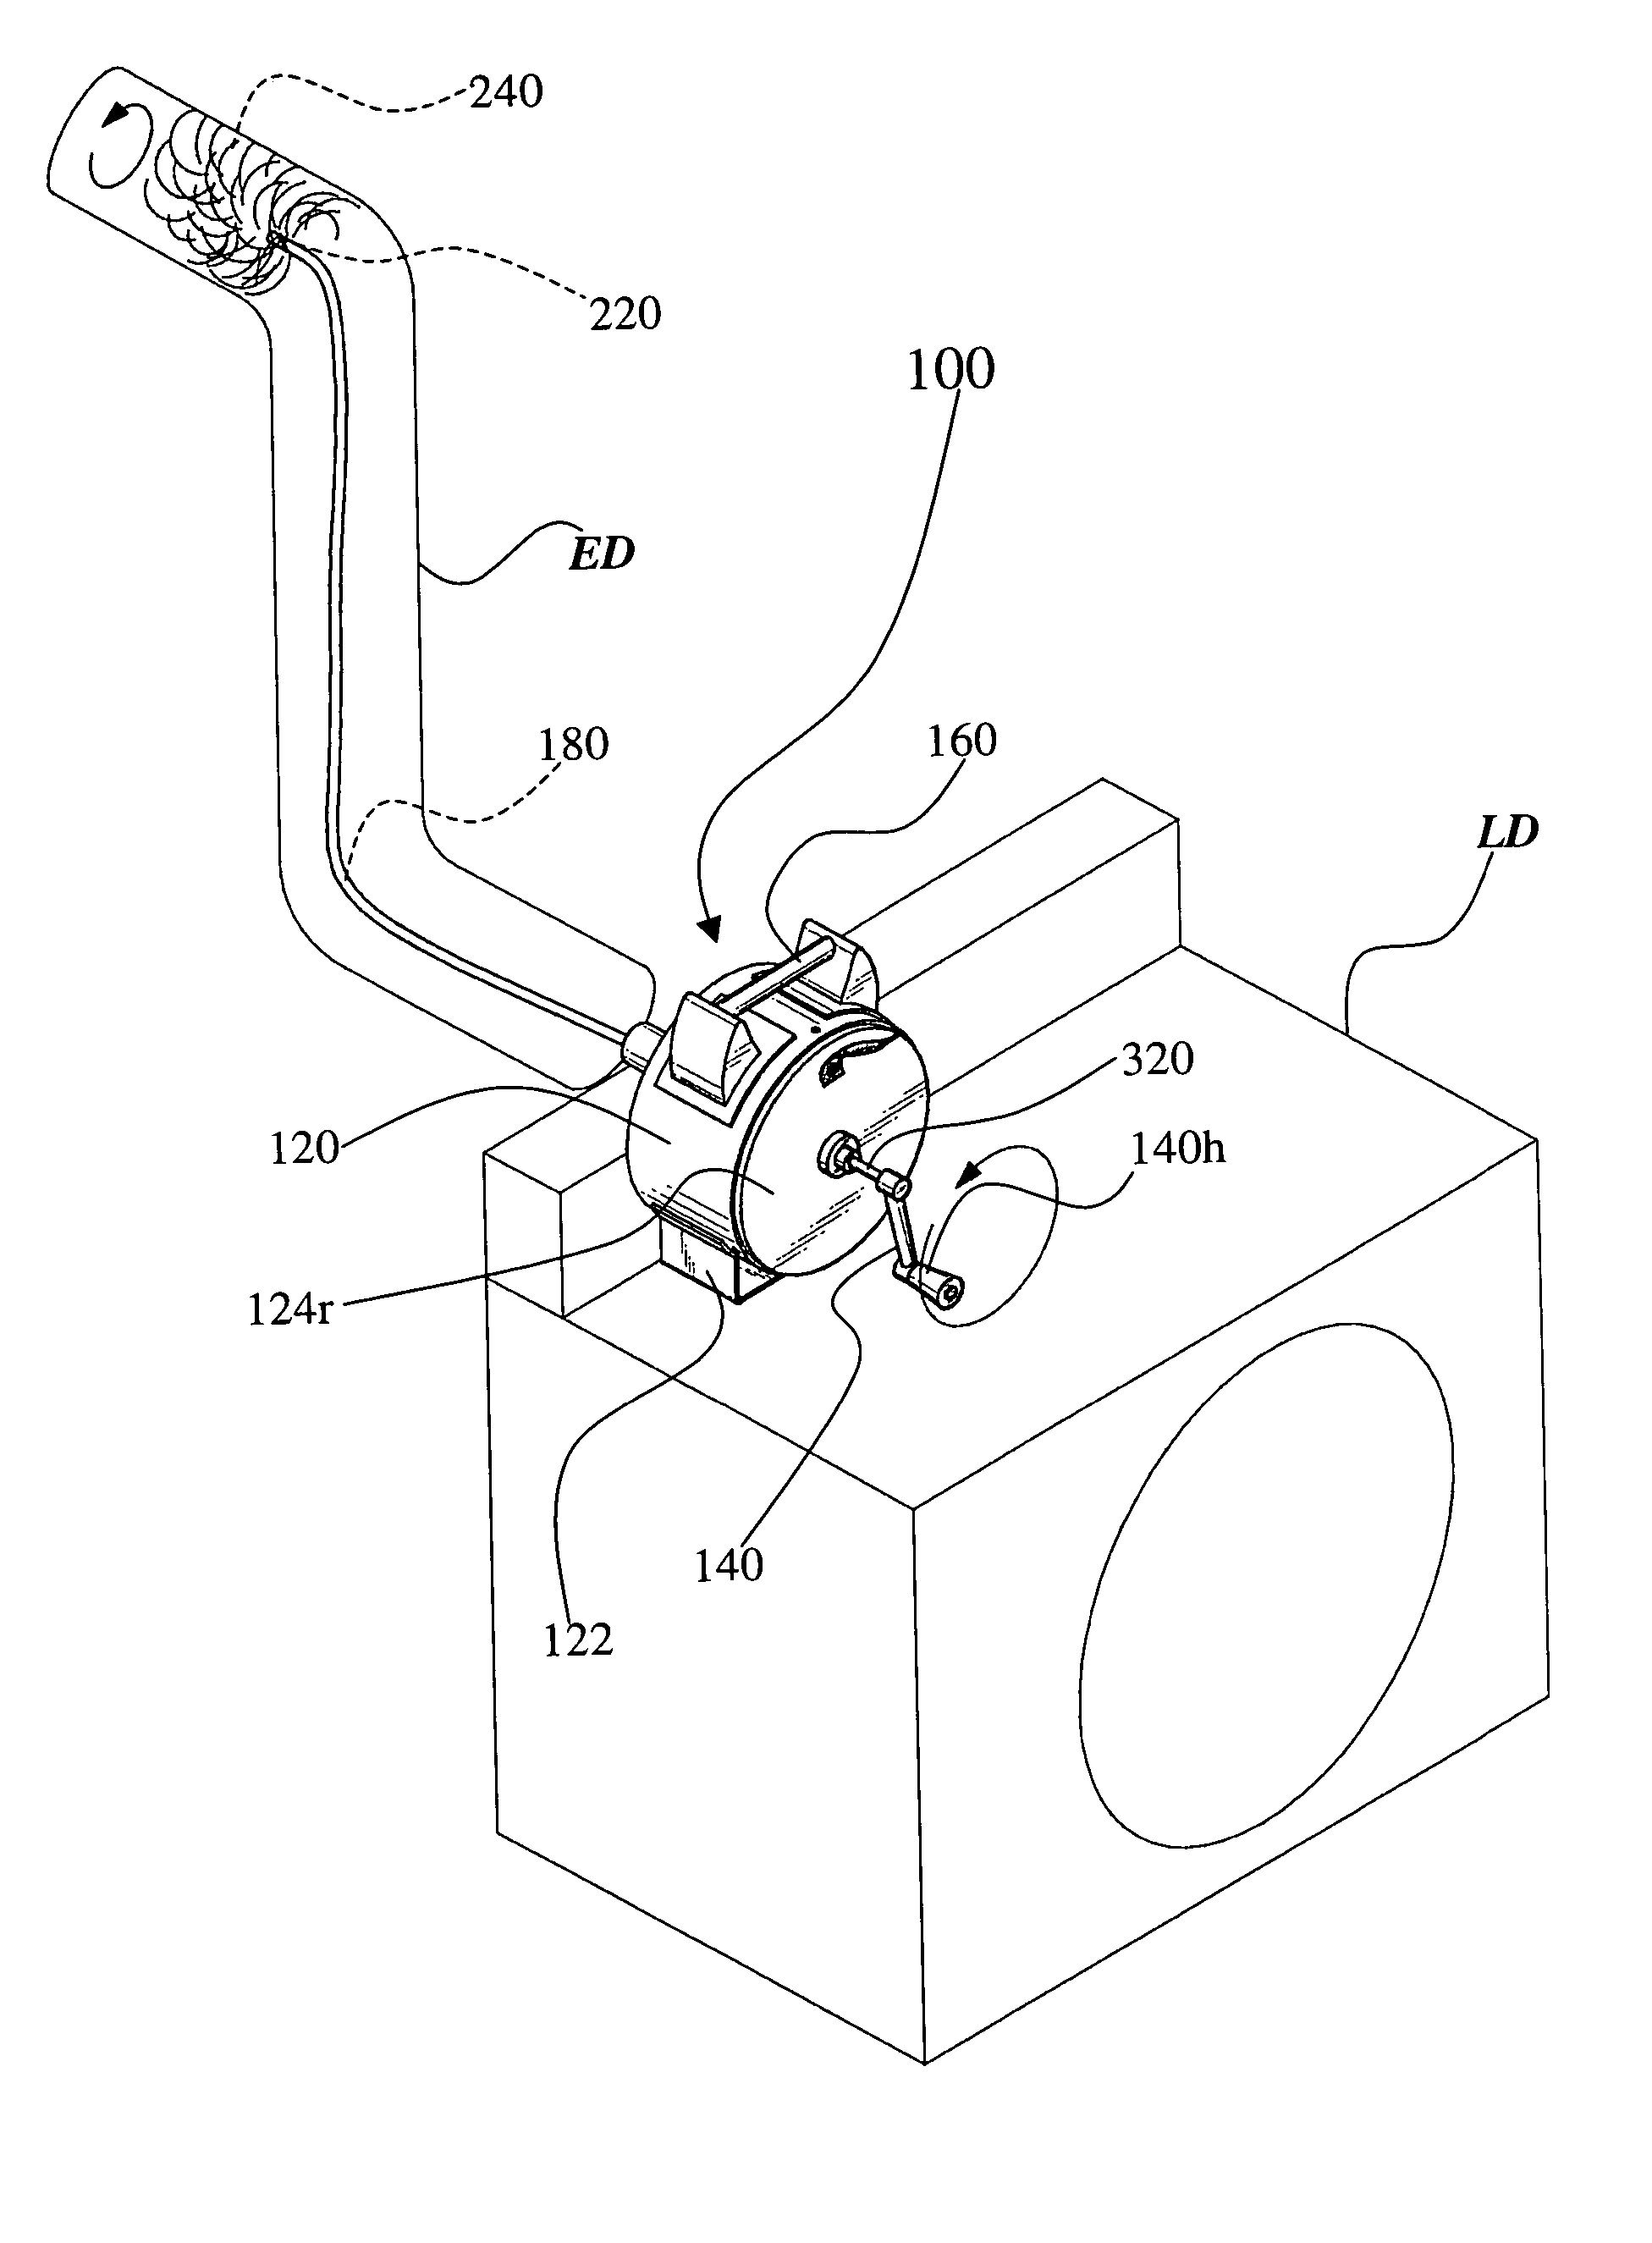 Cleaning device for cleaning ducts and pipes